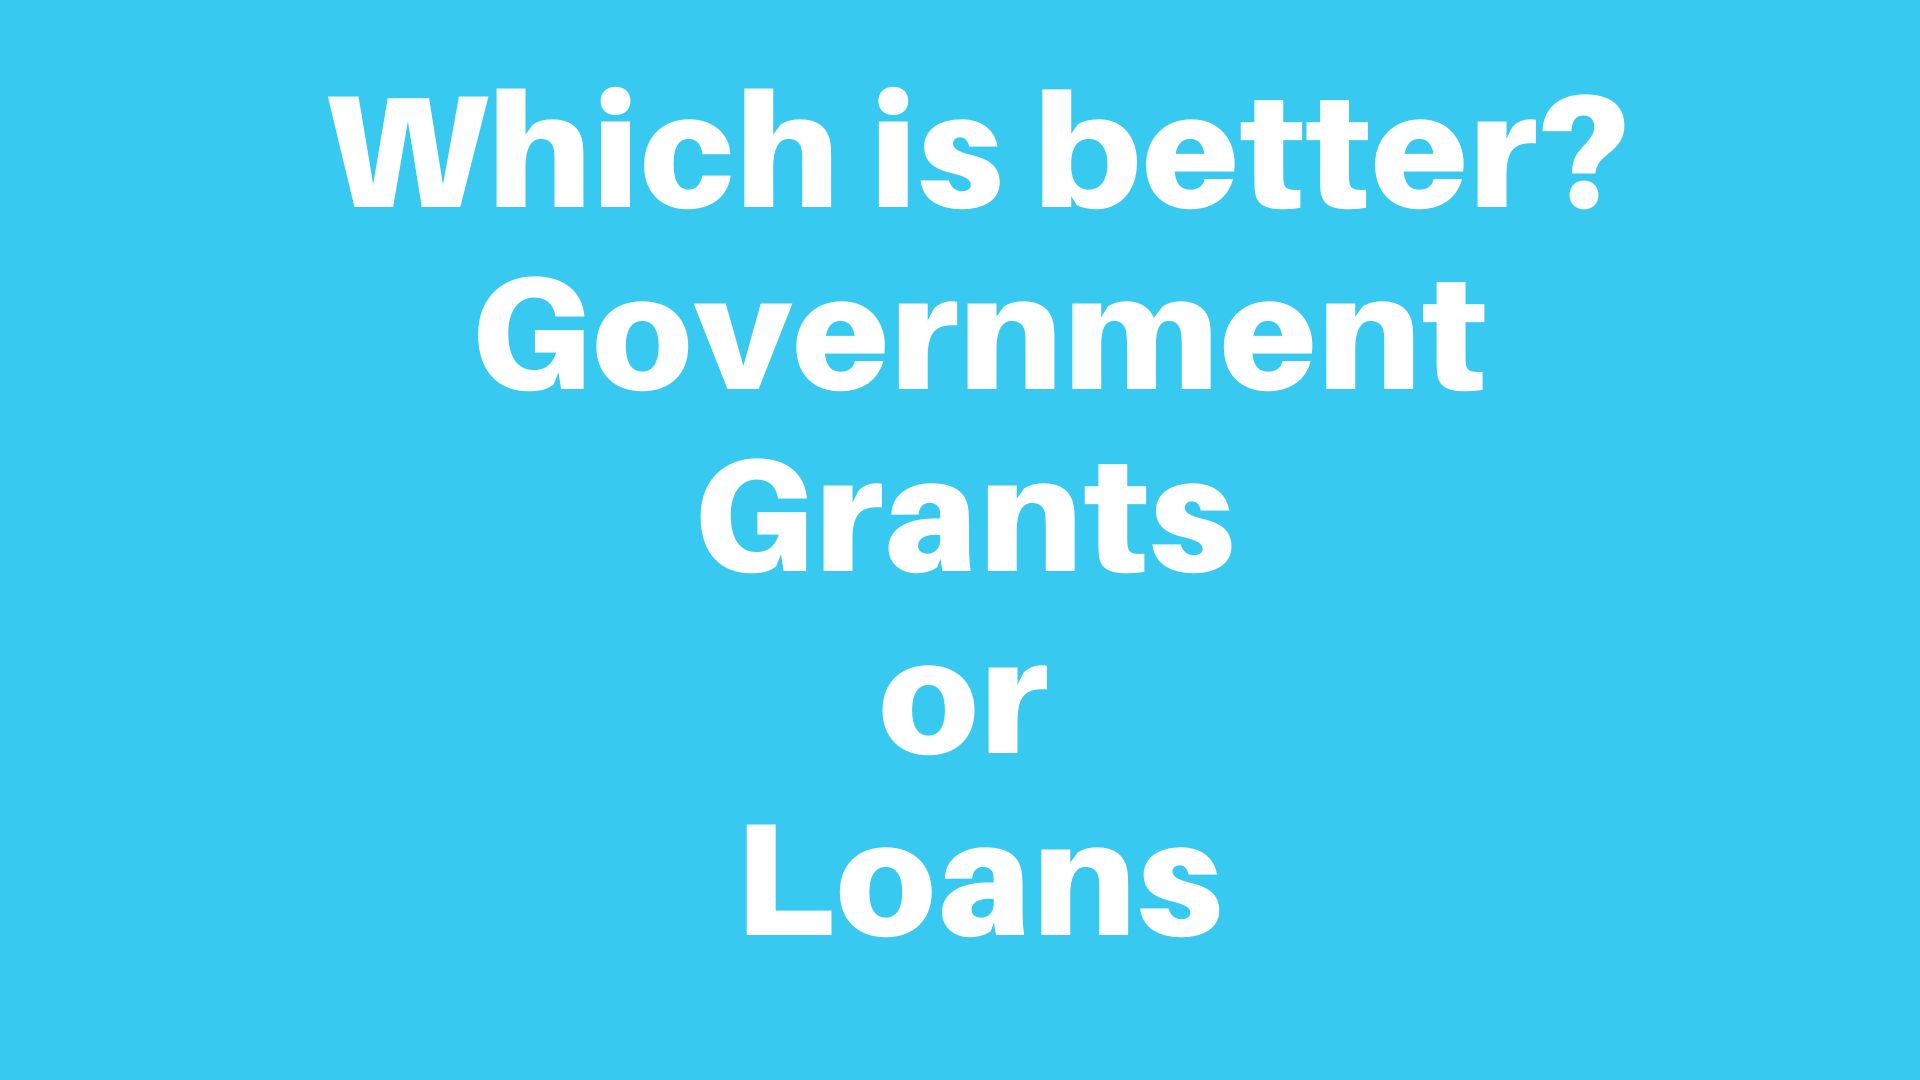 Which is better? Government Grants or Loans